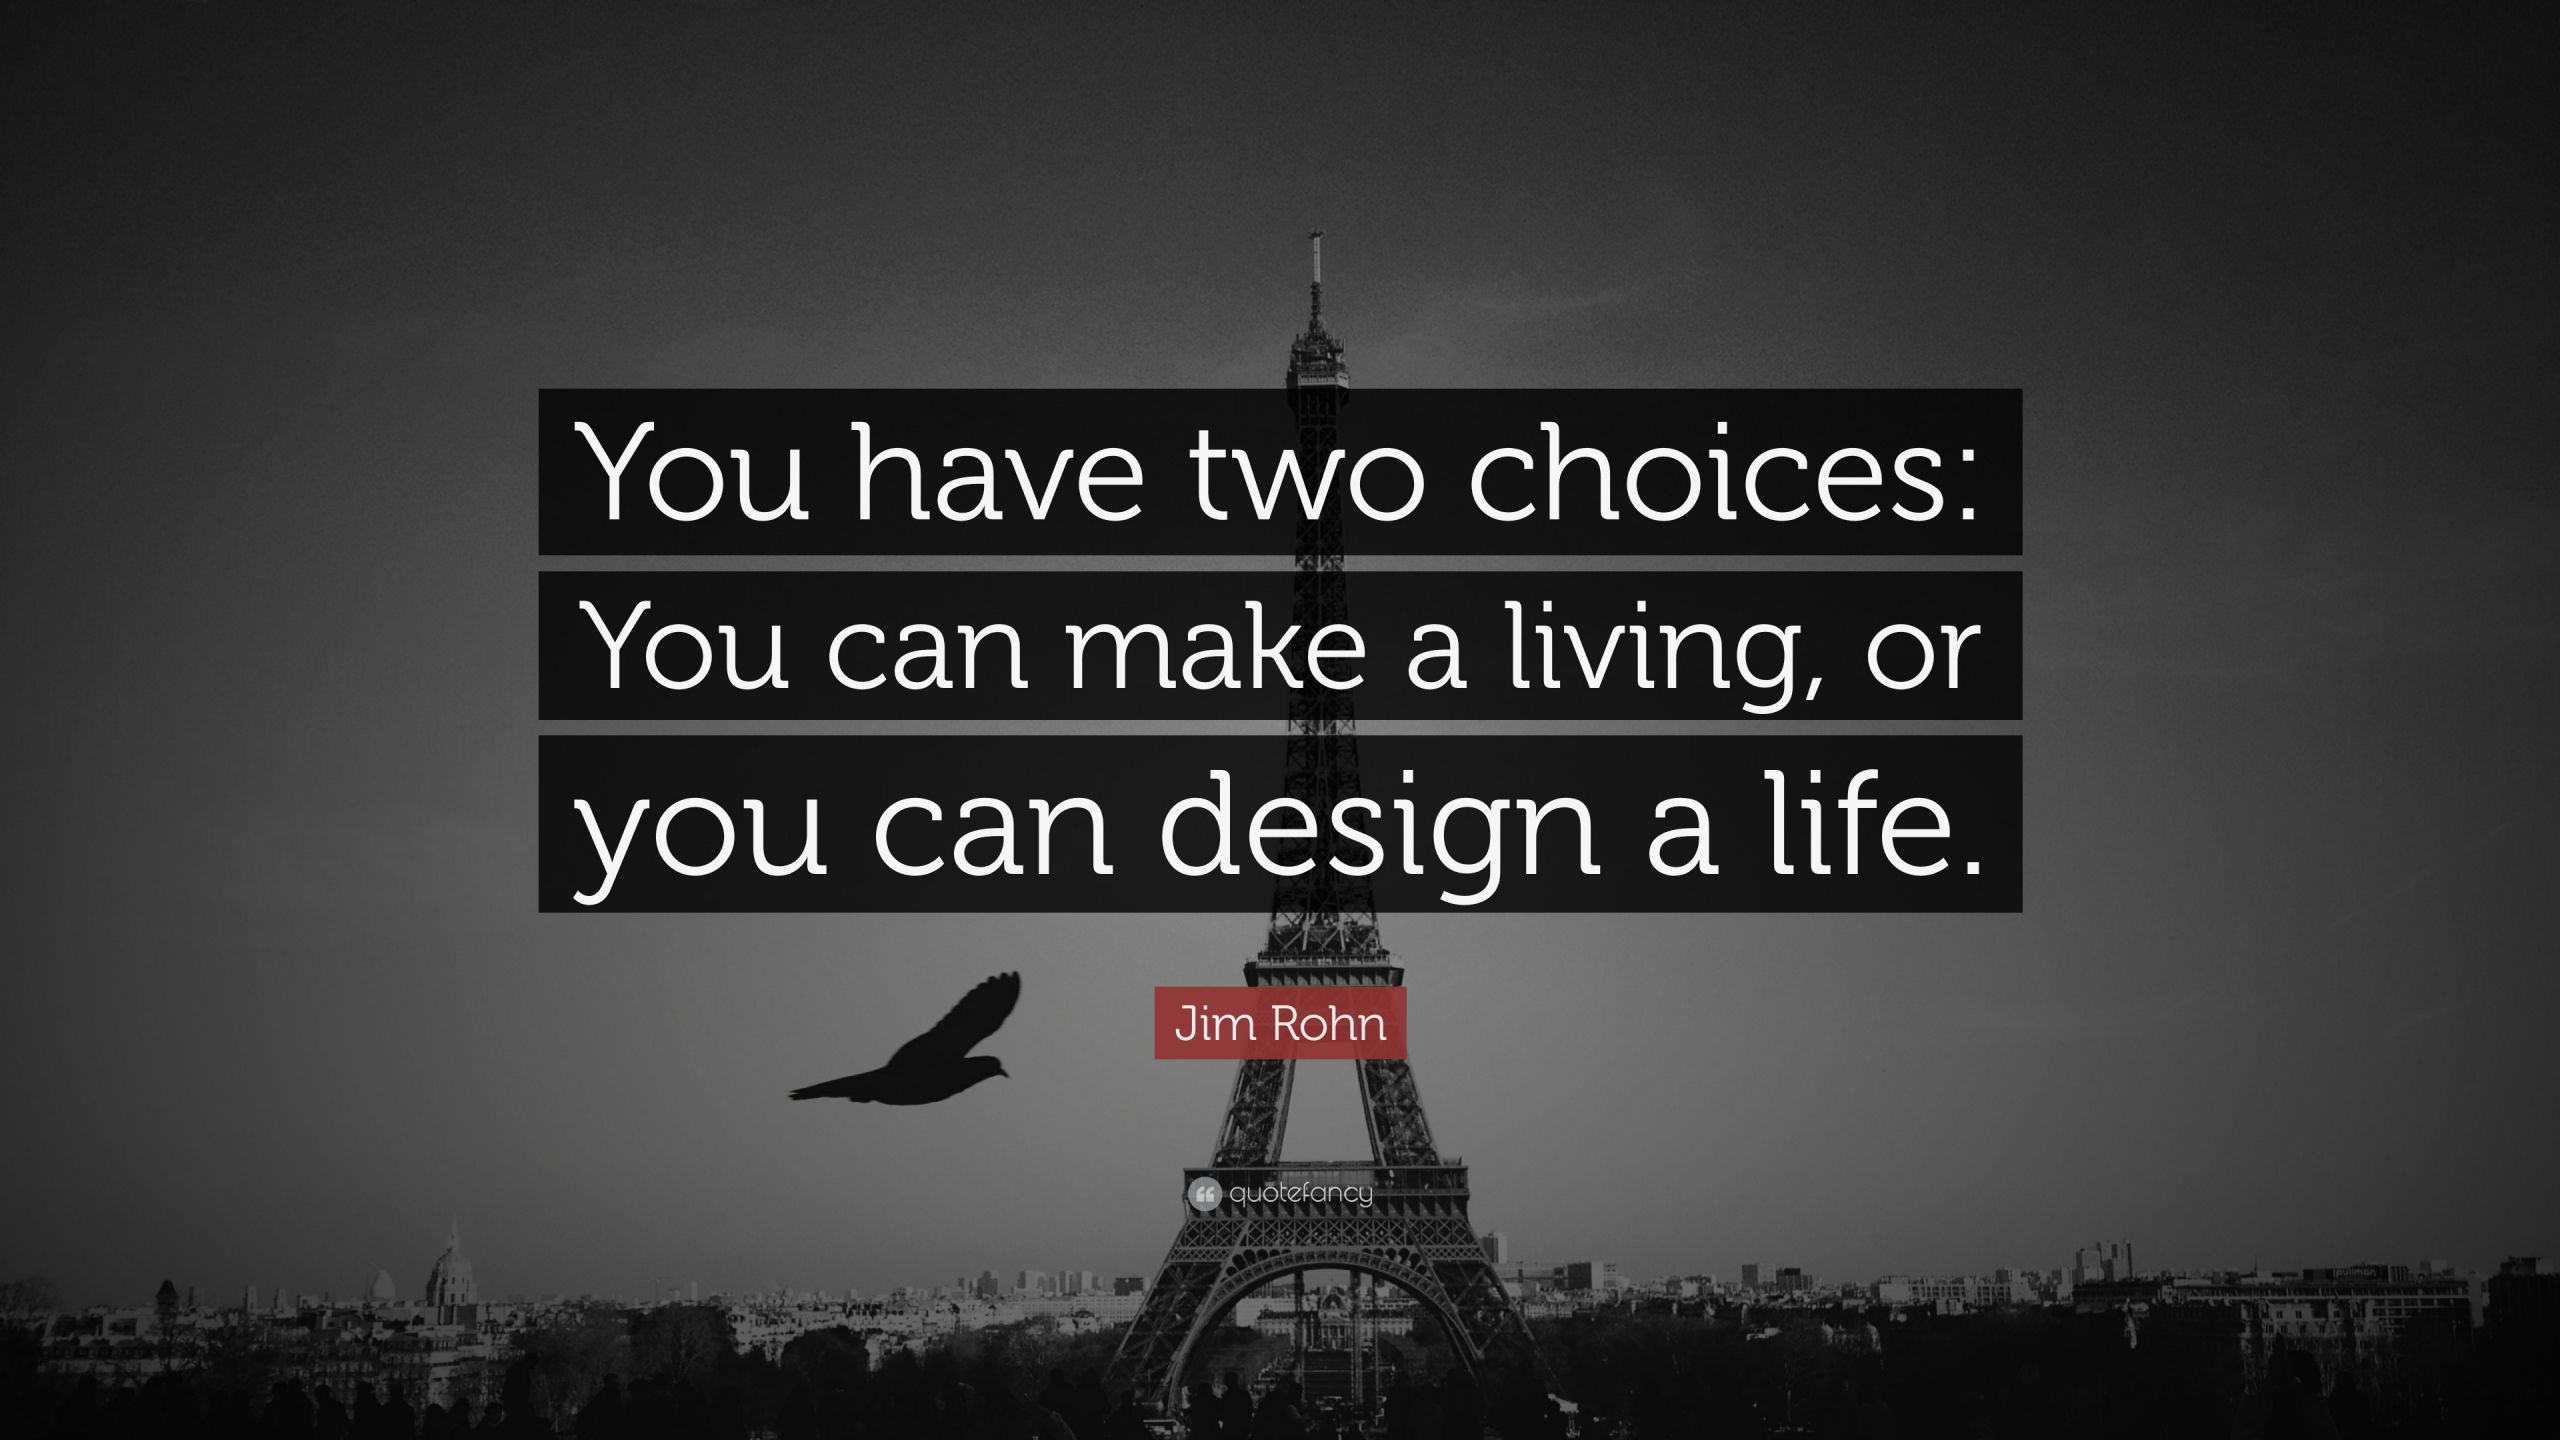 Motivational Quote Images
 Jim Rohn Quote “You have two choices You can make a